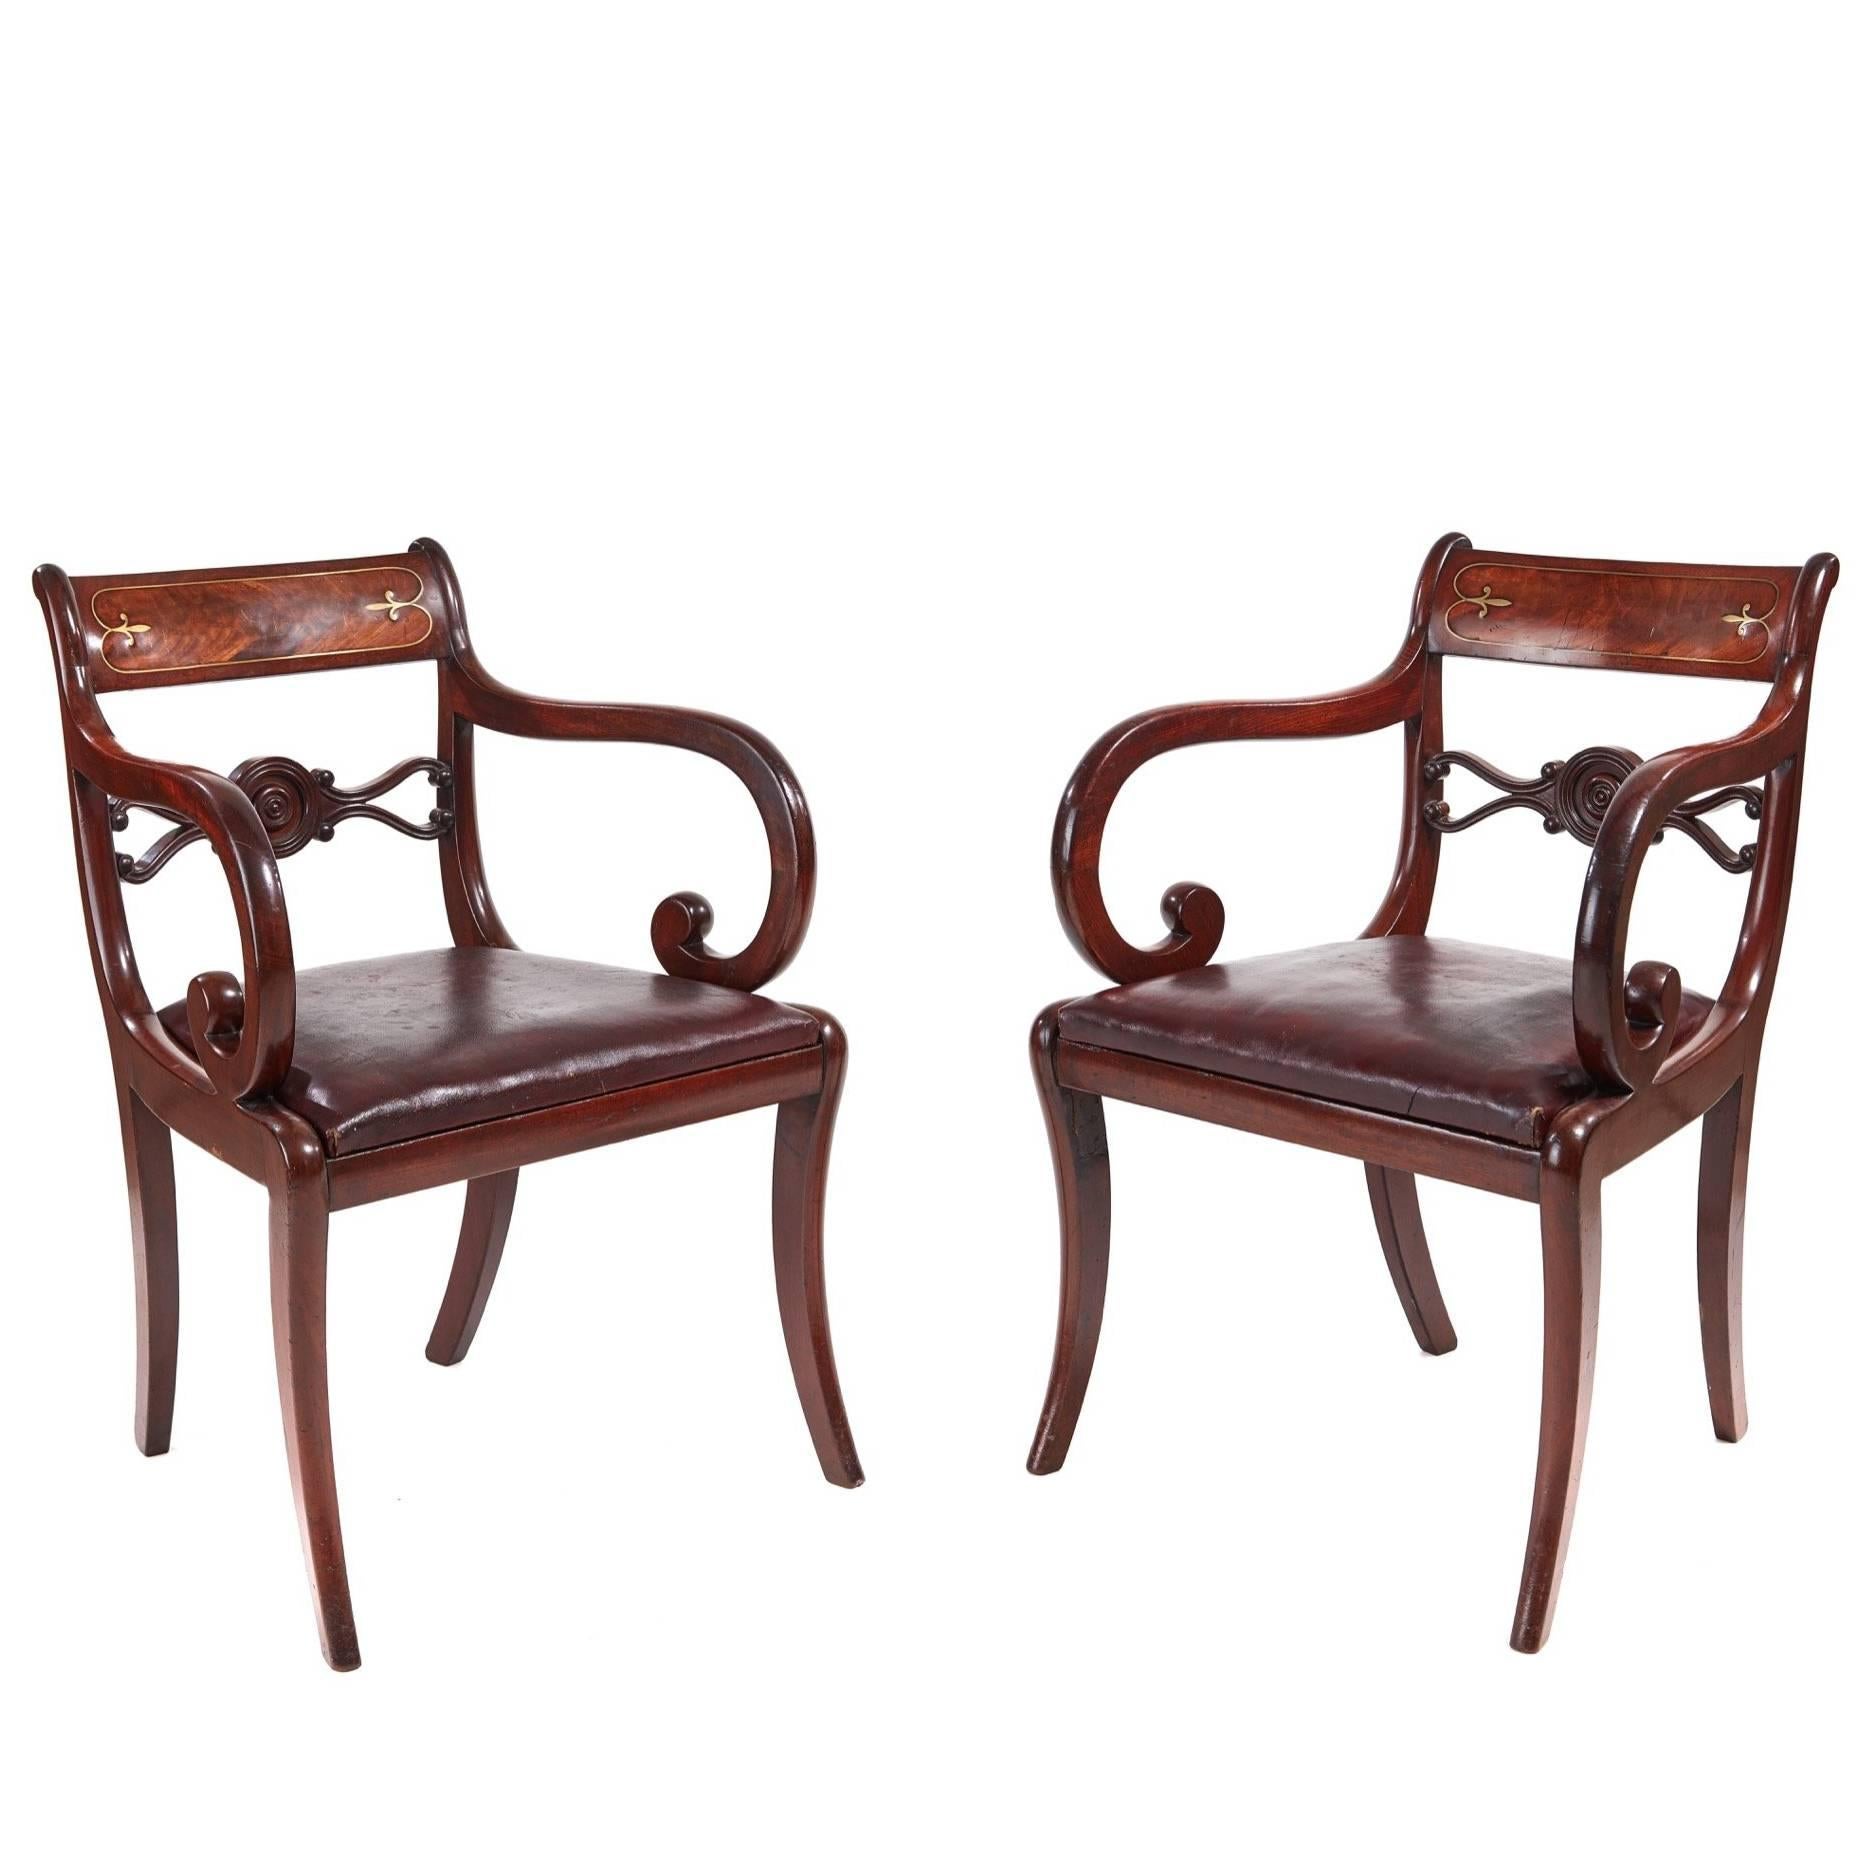 Fine Pair of Regency Brass Inlaid Elbow Chairs